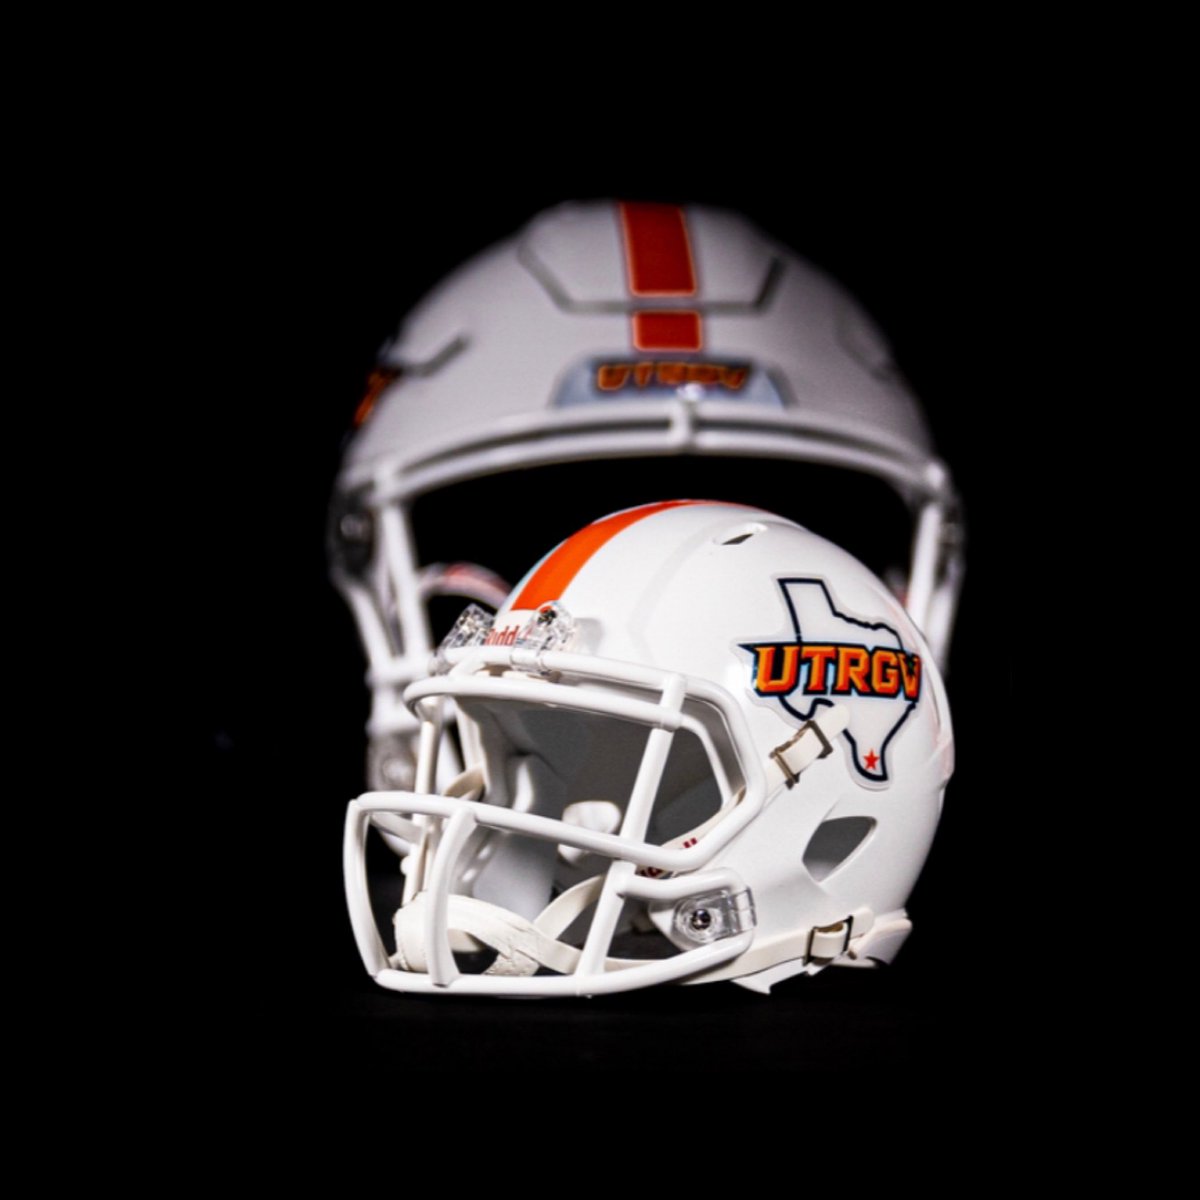 This is your reminder to donate to the V Club to receive your very own first edition Vaqueros mini helmet! 🏈

Donate here➡️  bit.ly/46m0eI4

#UTRGV #RallyTheValley #UTRGVfootball #Vclub